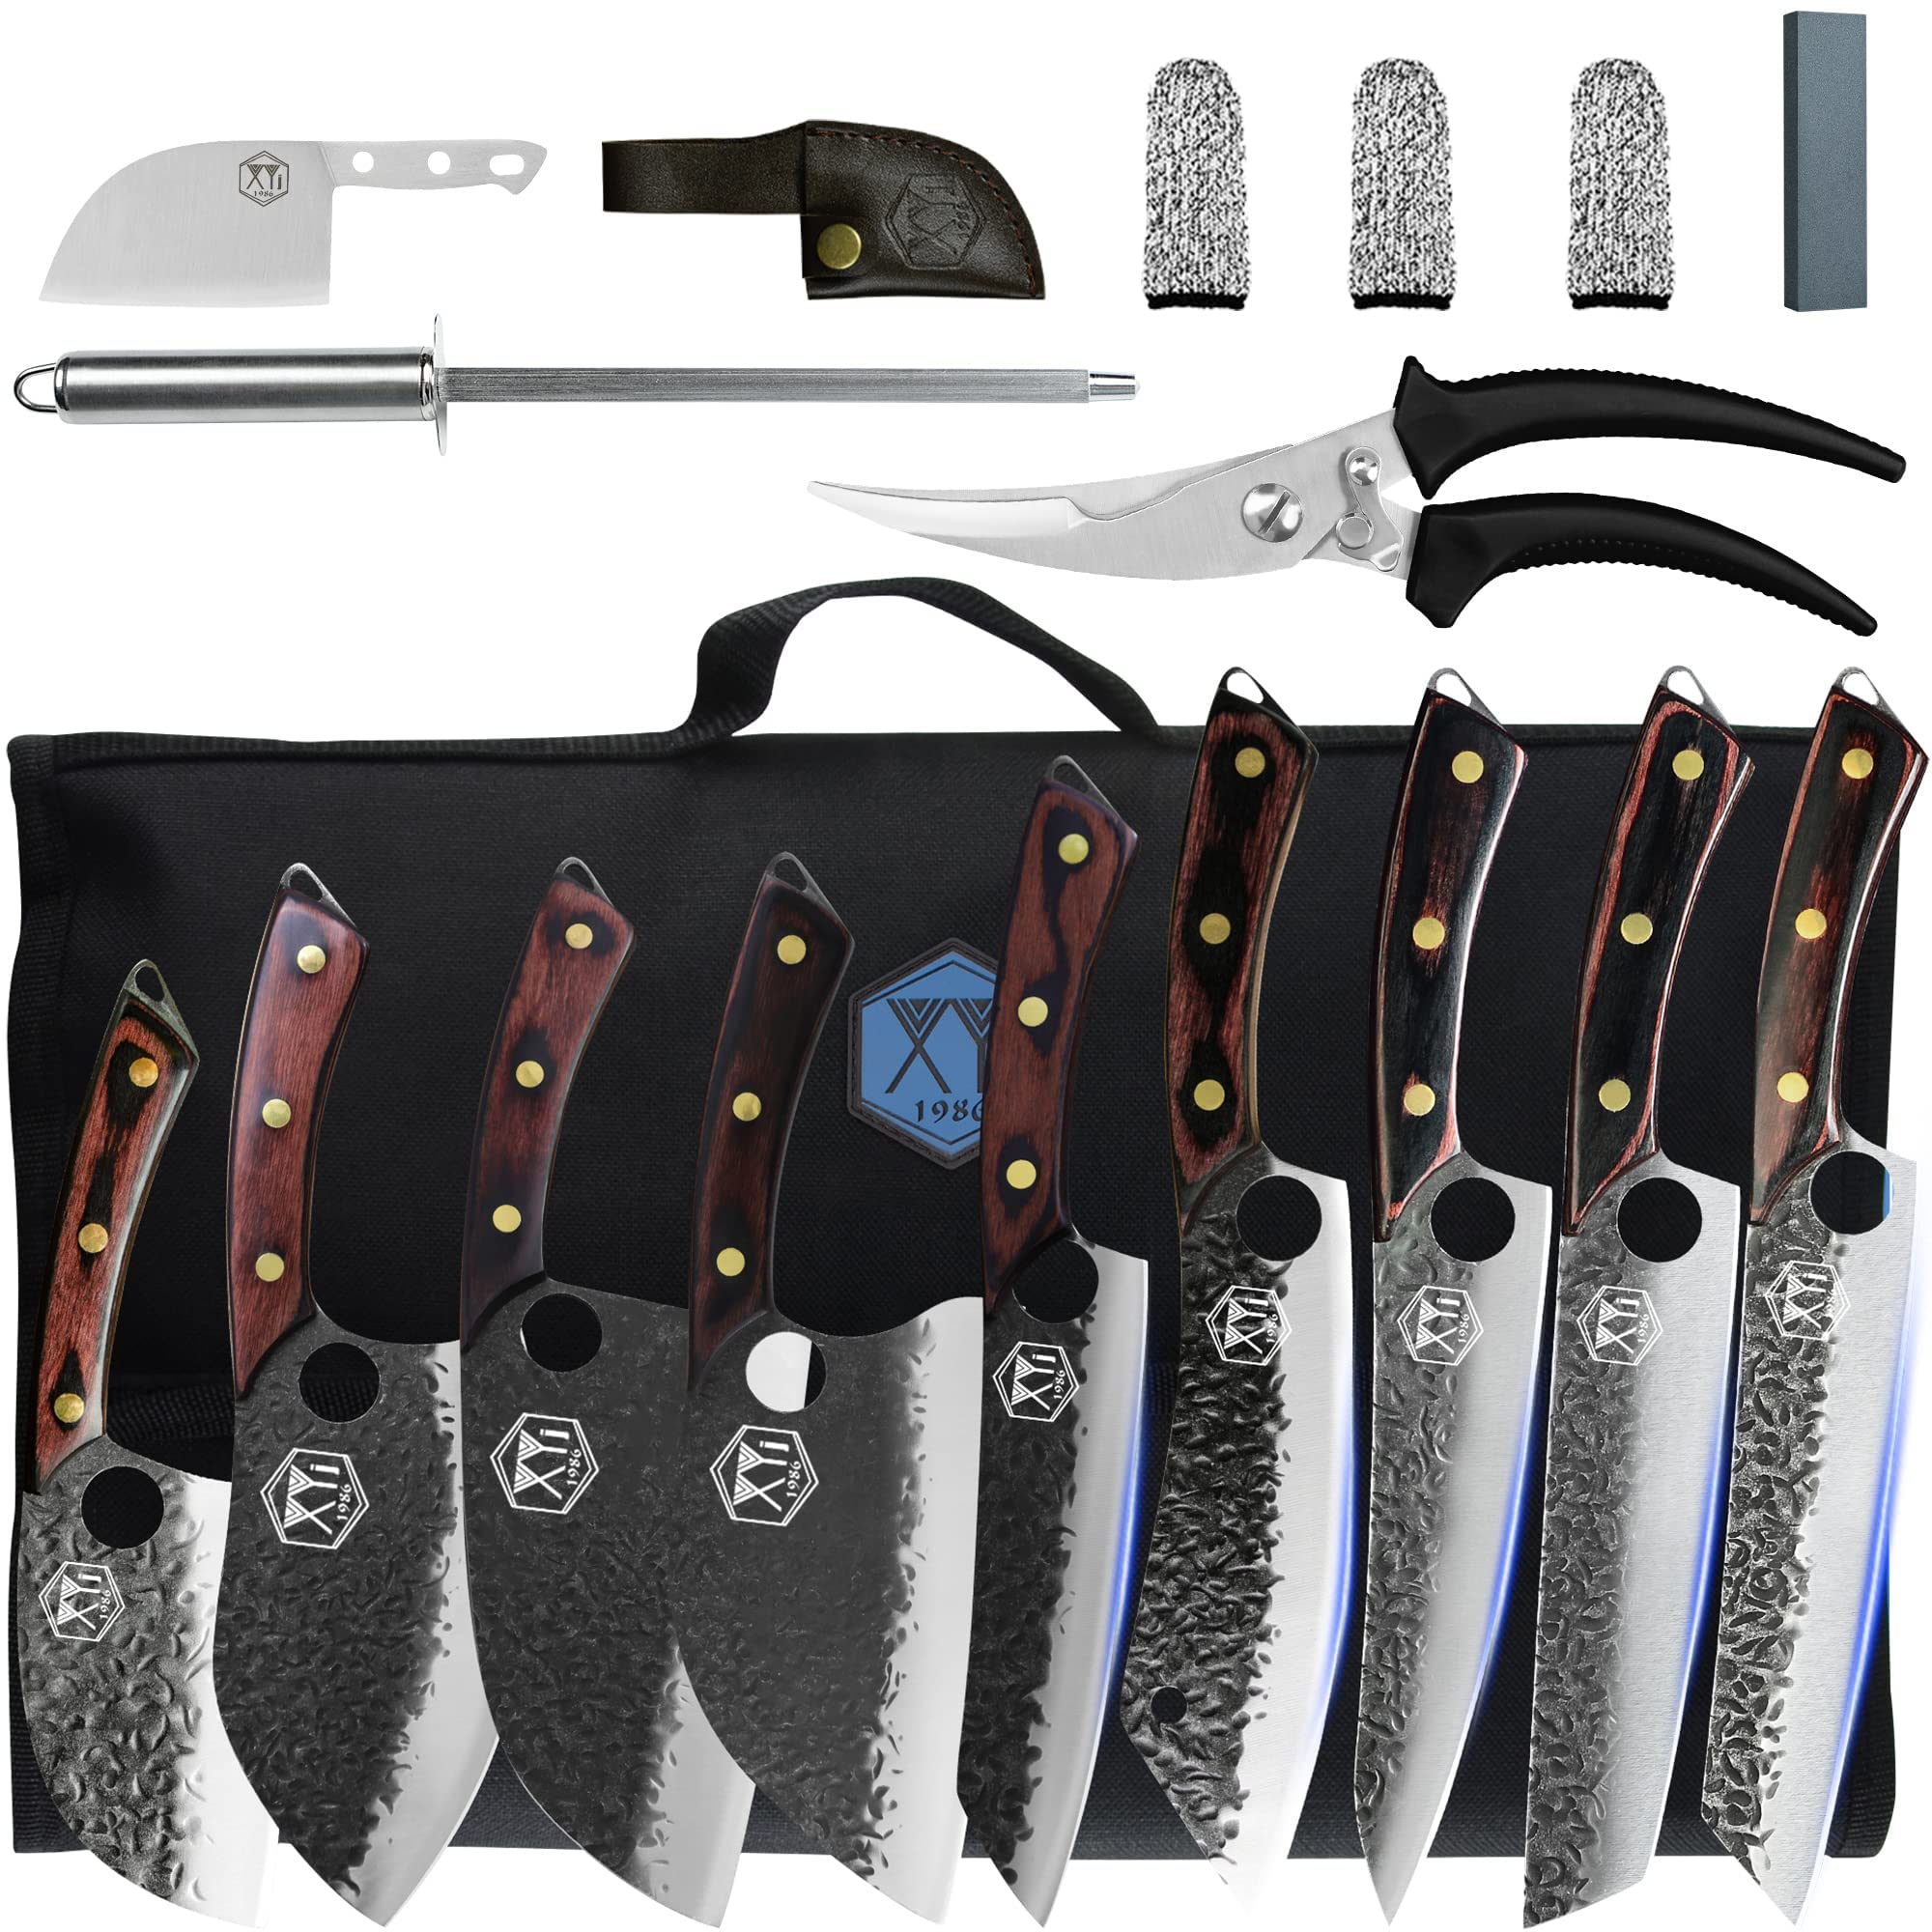 XYJ Authentic Since 1986 9pcs Forged Knife Set Review